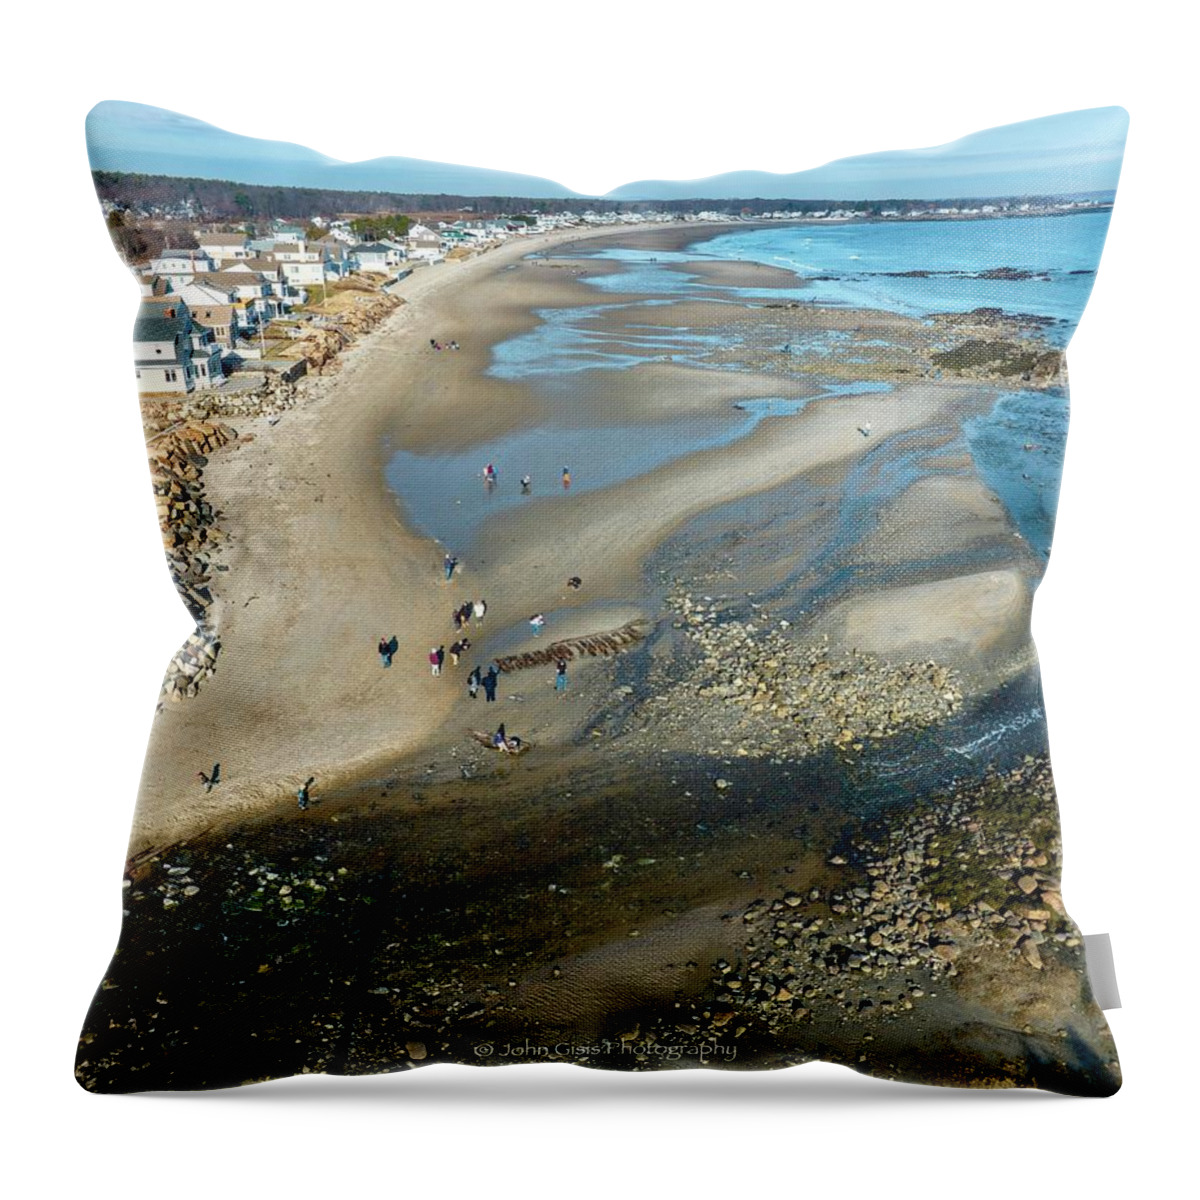  Throw Pillow featuring the photograph Lizzie Carr remnants by John Gisis